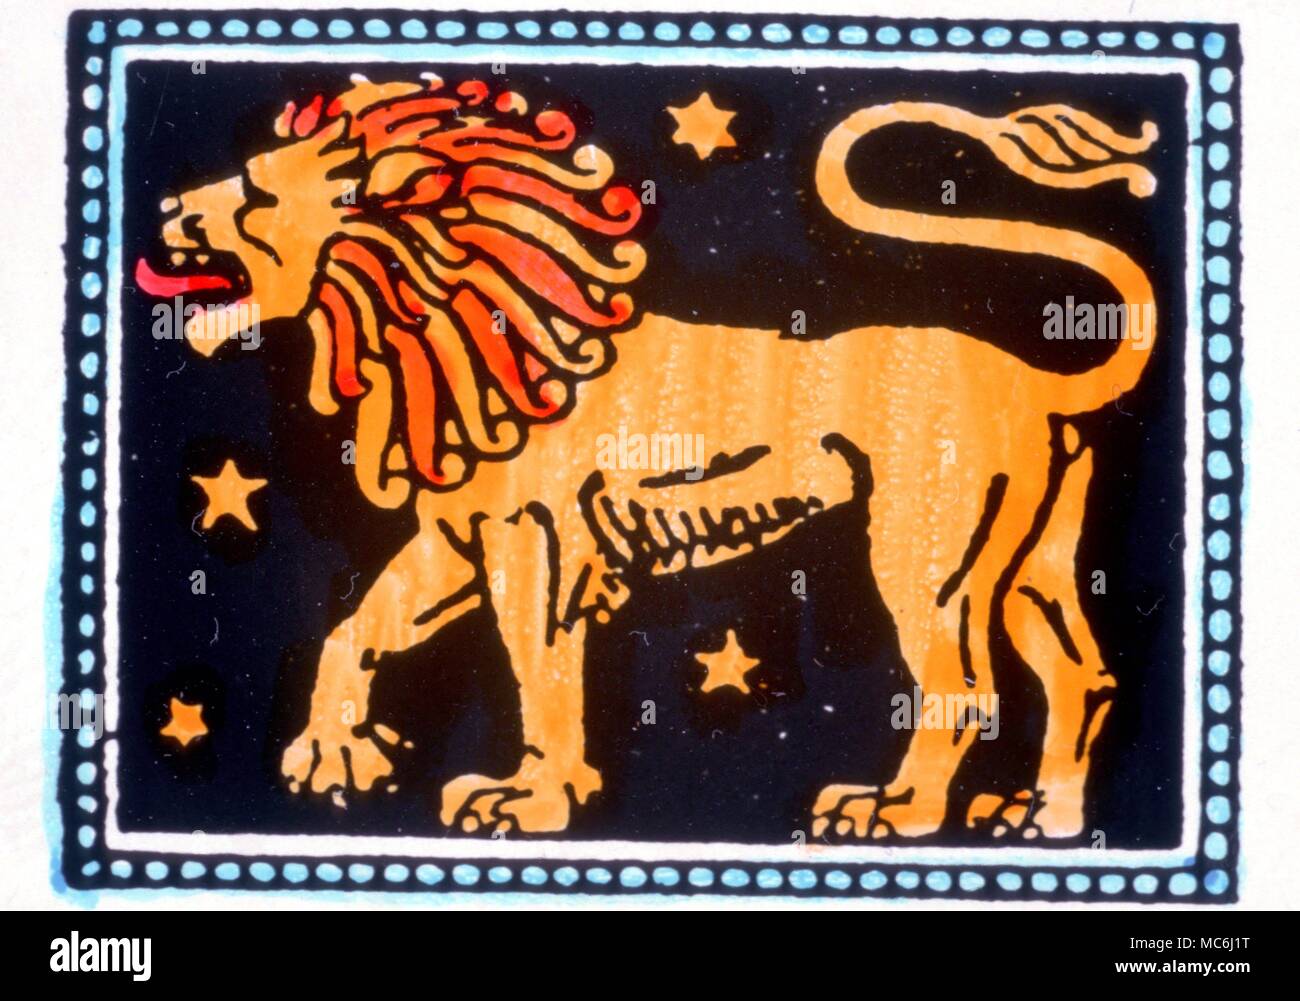 Zodiac Signs Leo Leo the Lion from a late 19th century textbook on astrology Stock Photo